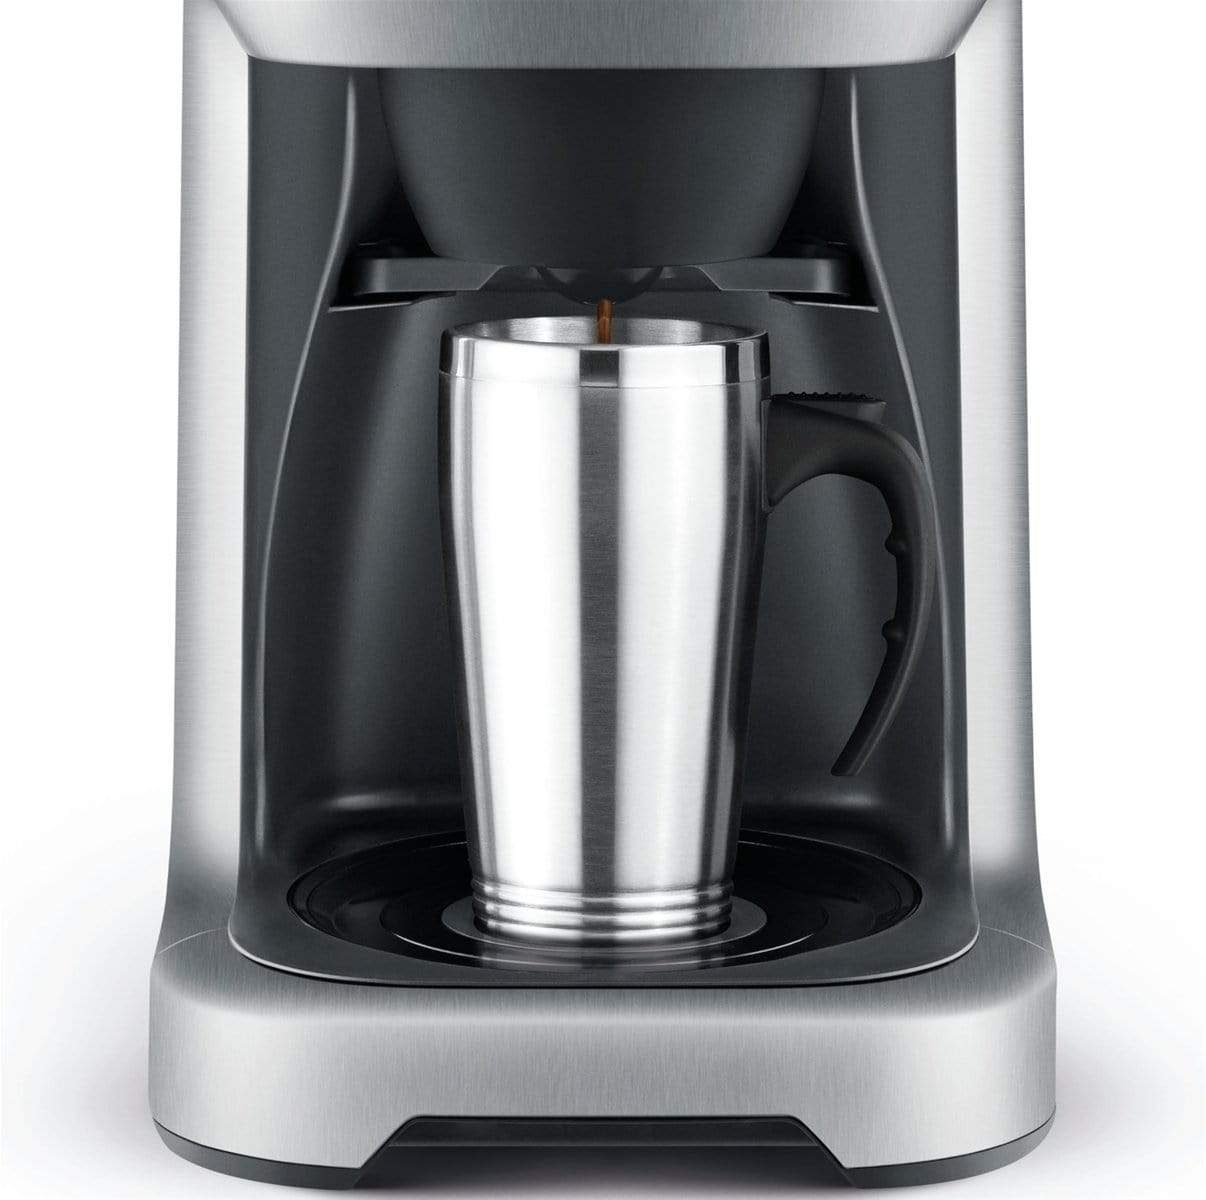 Breville Grind Control Coffeemaker - Kitchen & Company